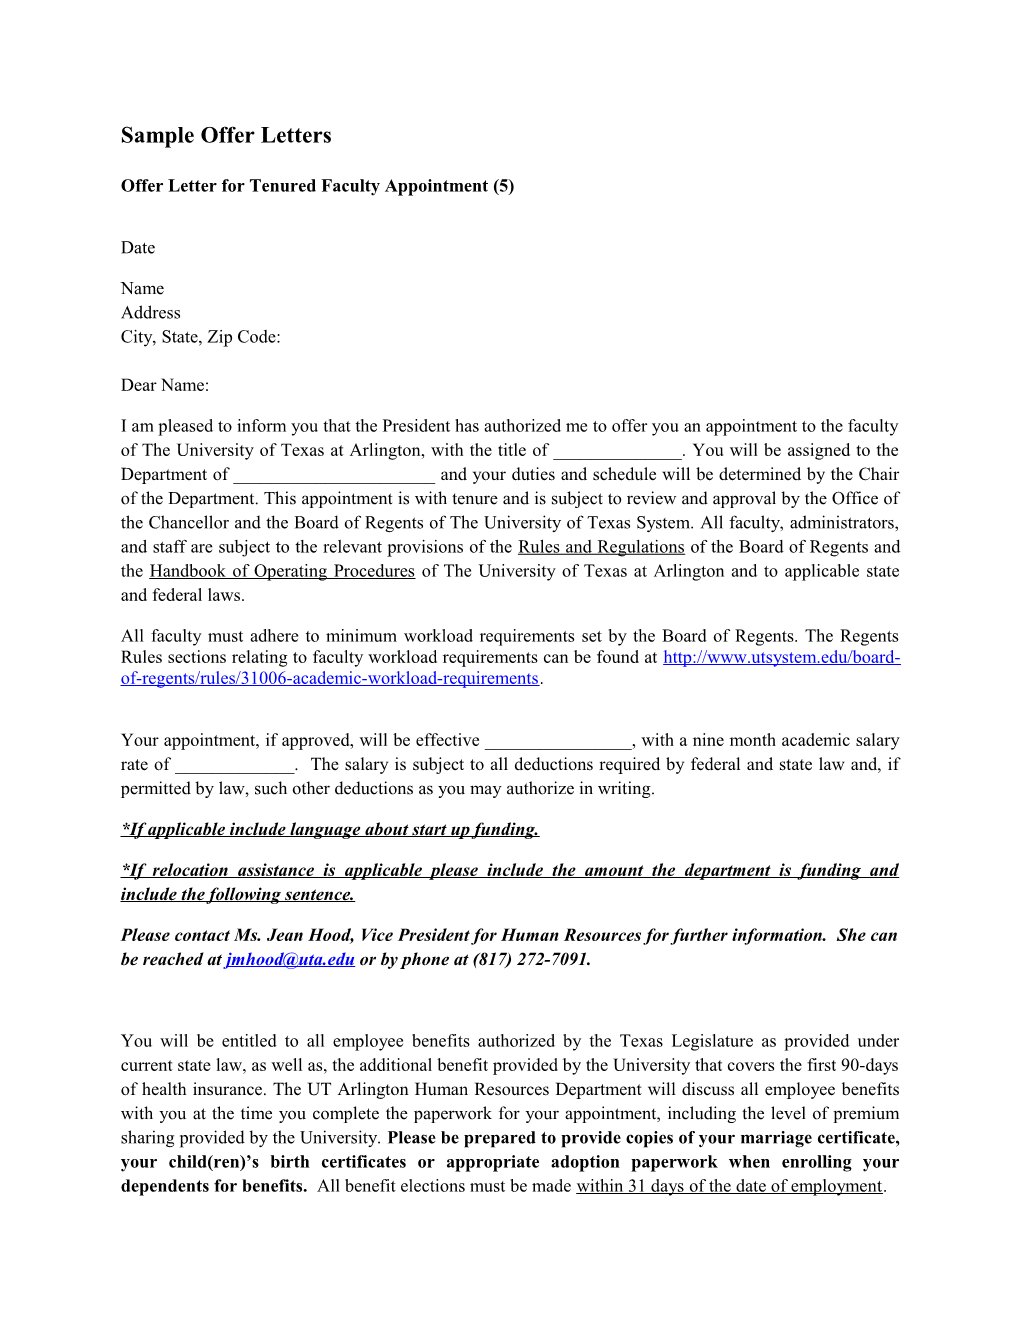 Offer Letter for Tenured Faculty Appointment (5)